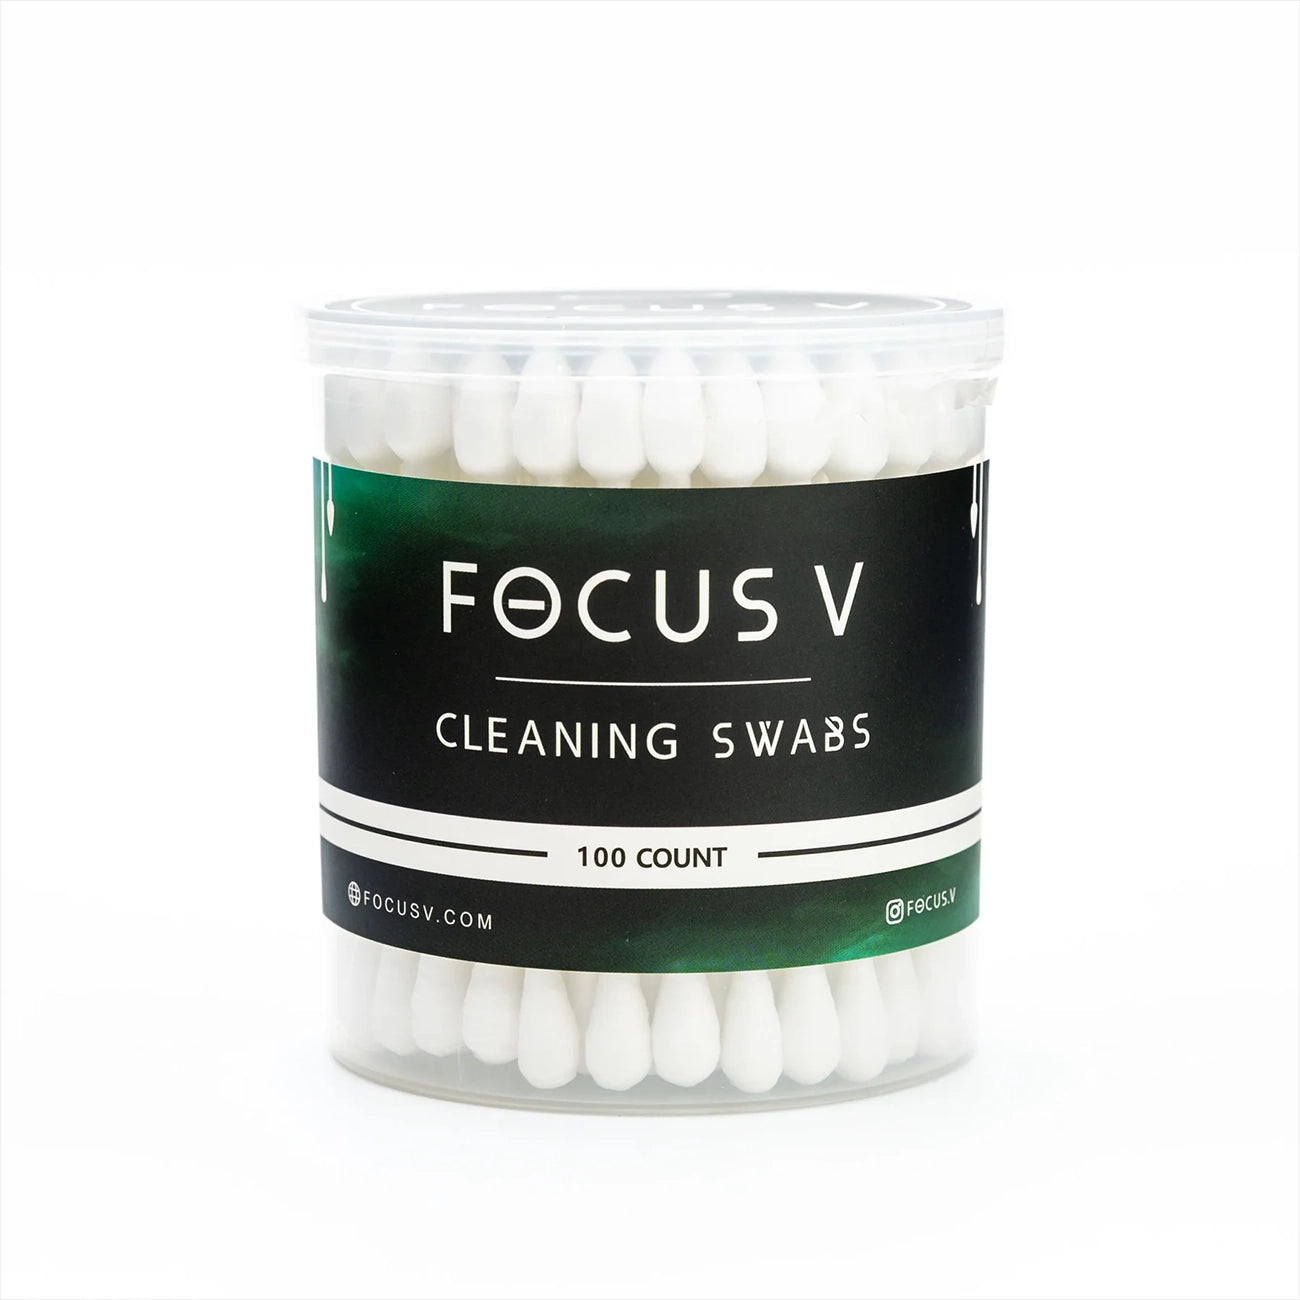 Focus.V "Cleaning Swabs" 100CT